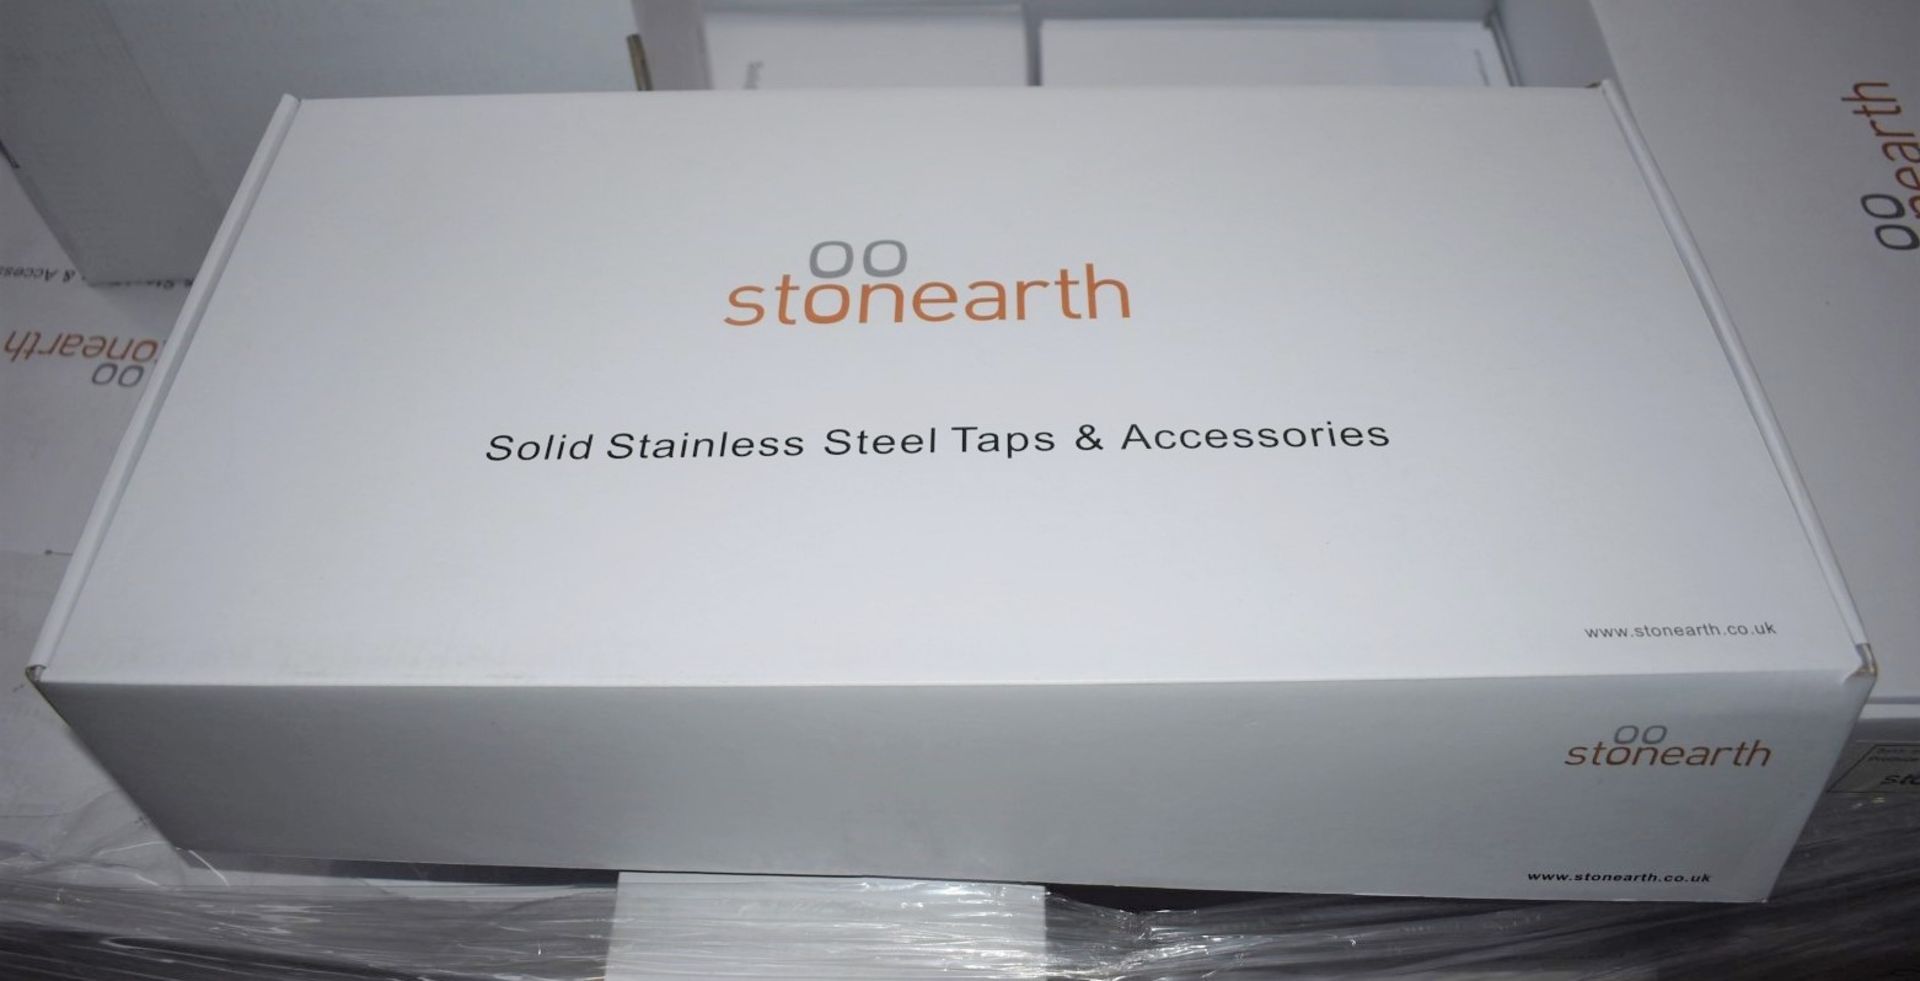 1 x Stonearth Bath Waste Kit With Stainless Steel Covers - Brand New & Boxed - RRP £125 - Ref: TP893 - Image 3 of 7